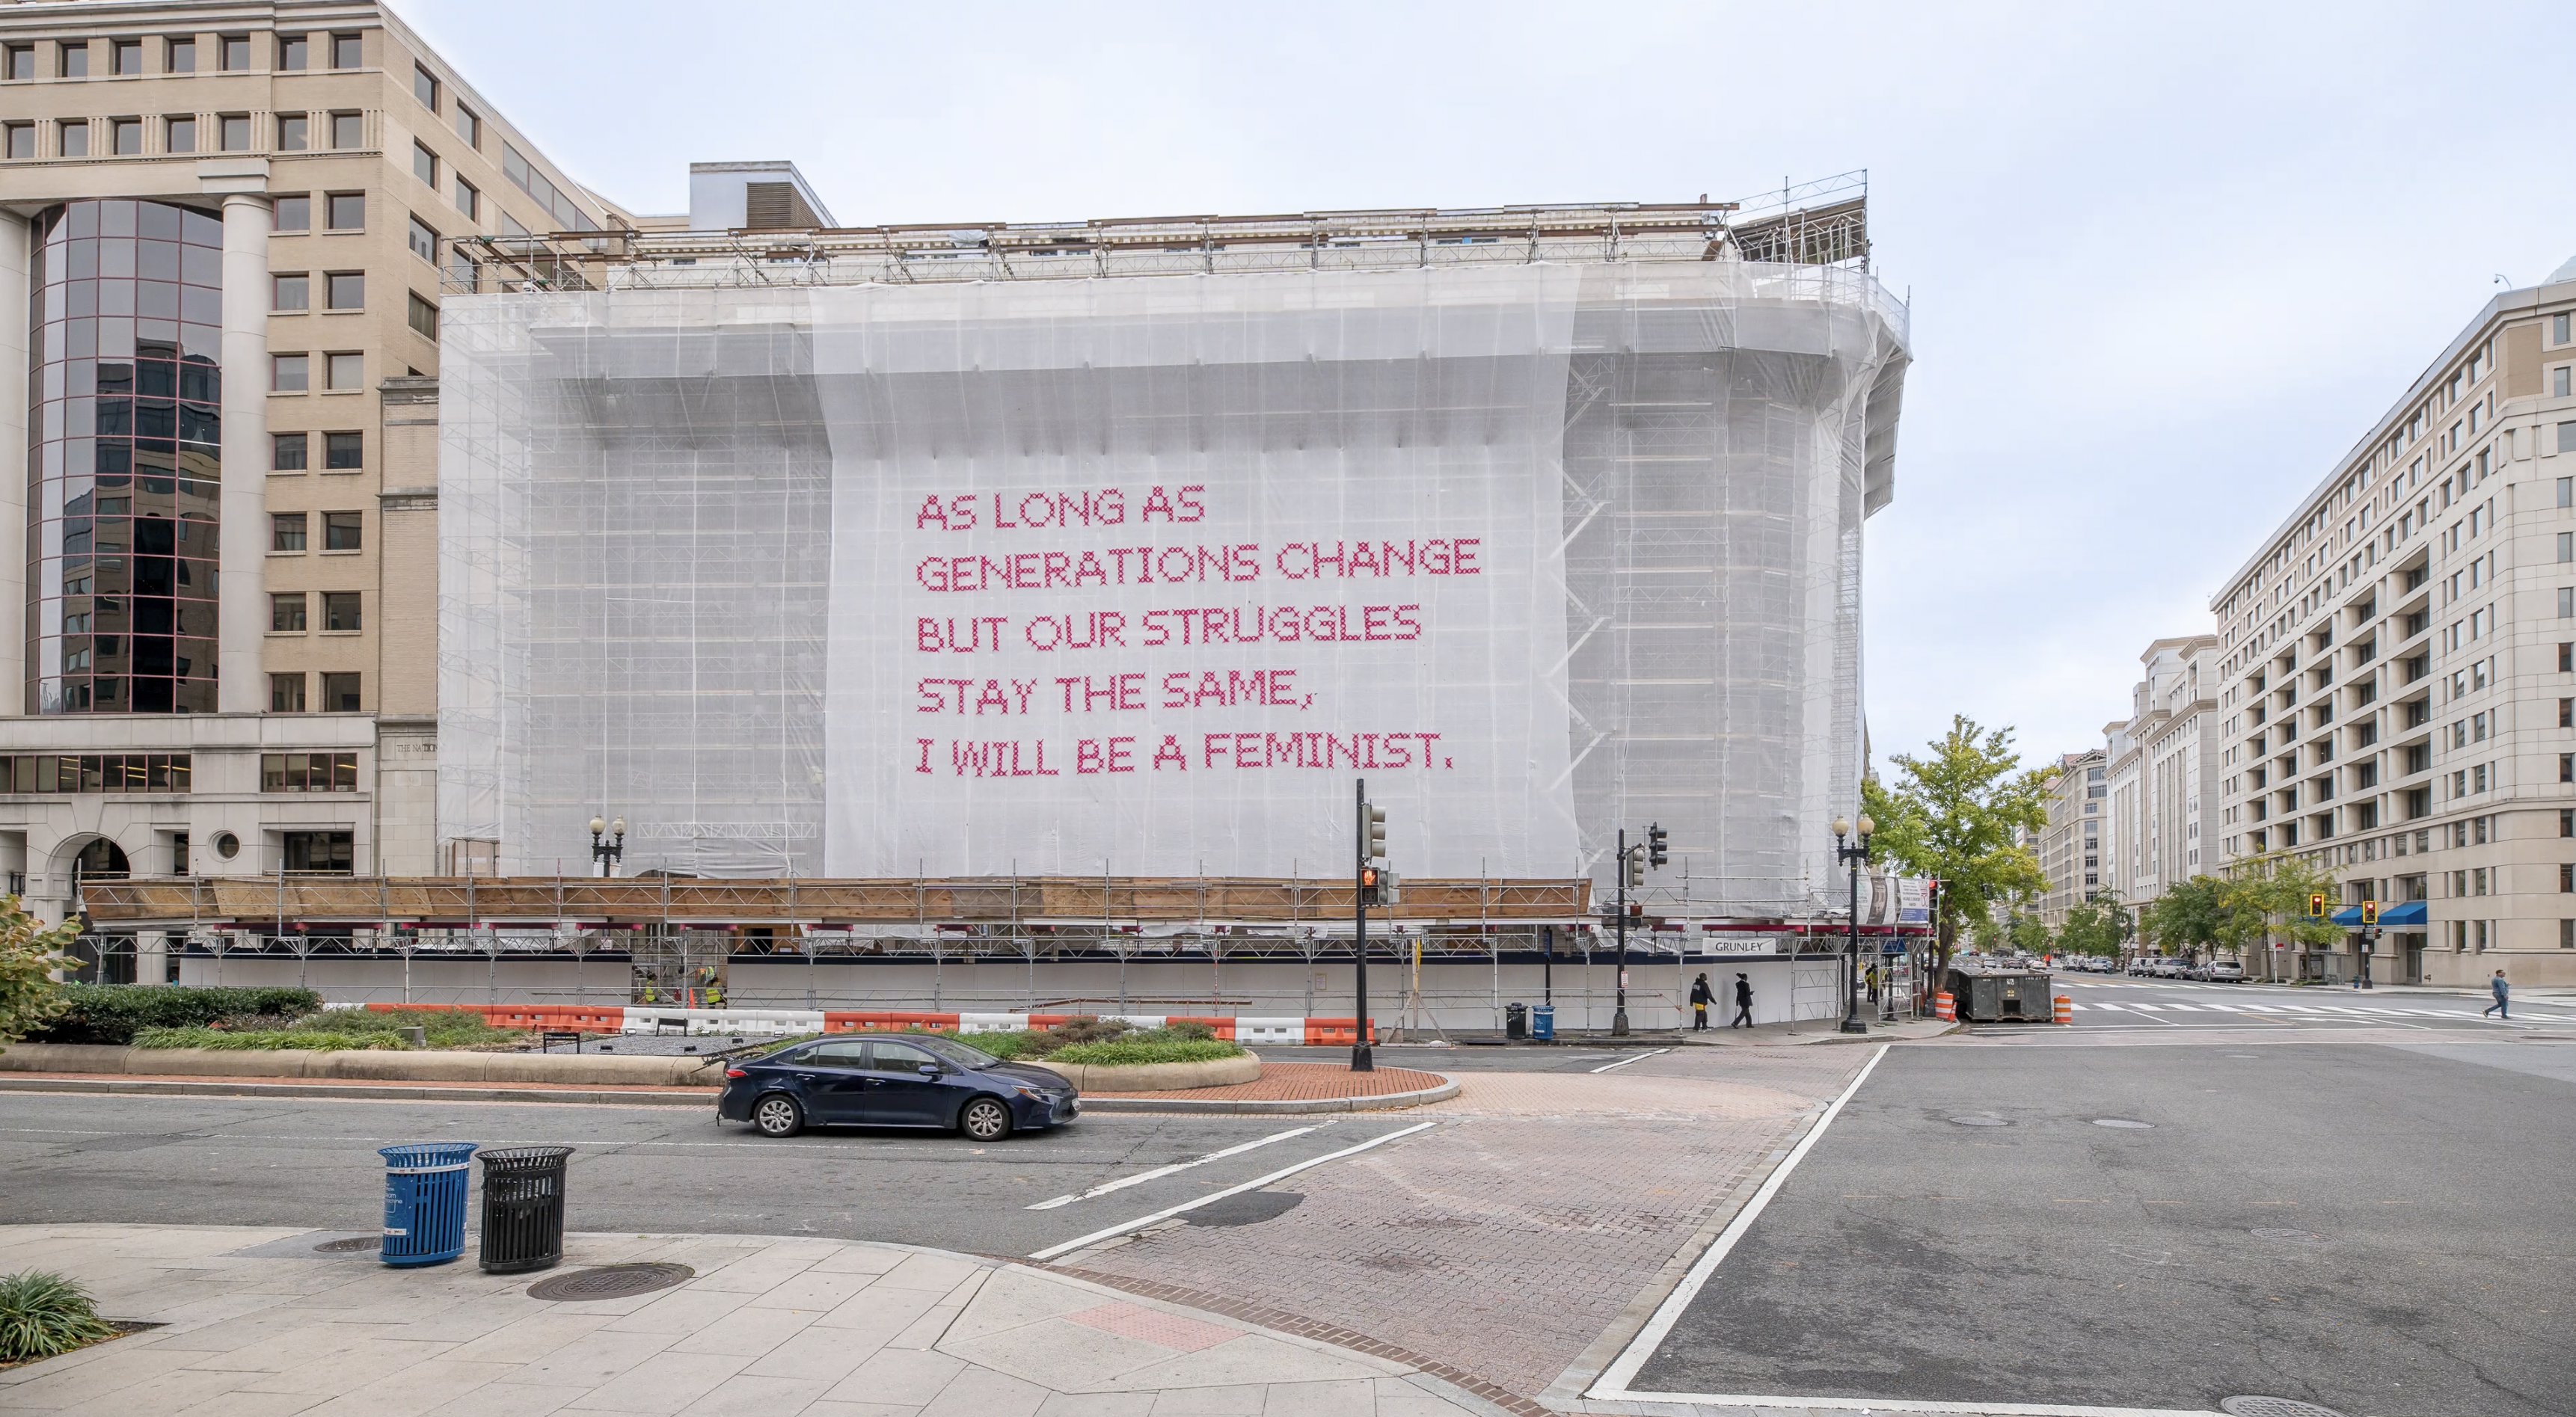 Video still of a building with a white mesh artwork covering its façade, featuring bright pink cross-stitched letters that say 